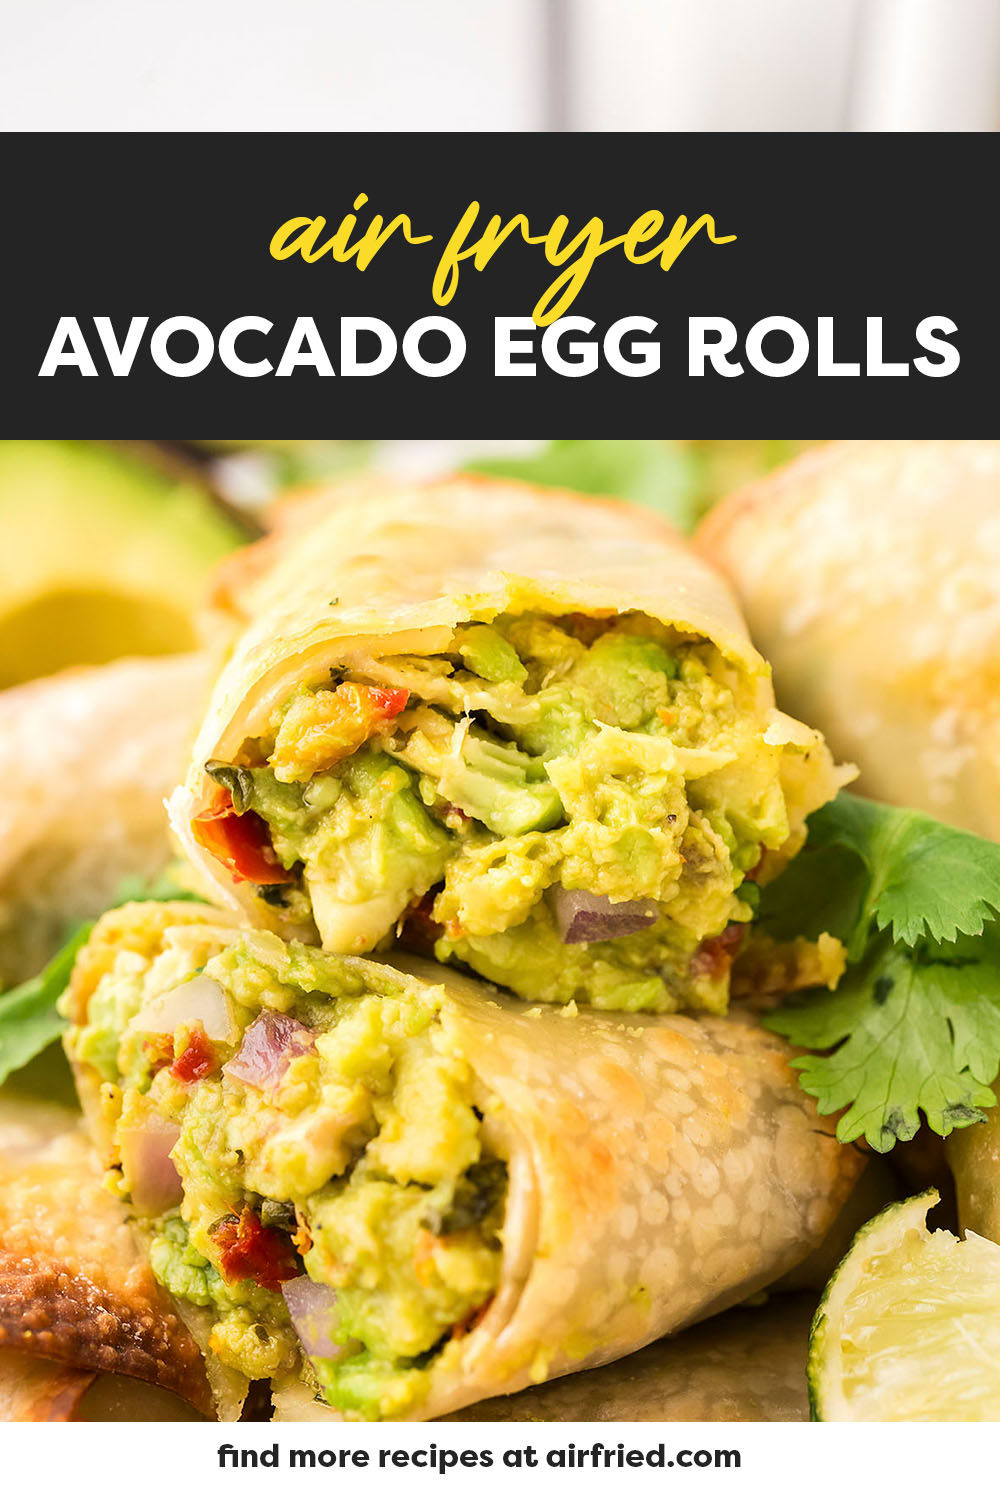 Our crispy on the outside, creamy on the inside Avocado Egg Rolls are made in the air fryer to keep things super simple! These are loaded with fresh avocado, zippy sun-dried tomato, and red onions, all dipped in a homemade chipotle ranch dressing! If you love the egg rolls from the Cheesecake factory, you're going to want to try these!